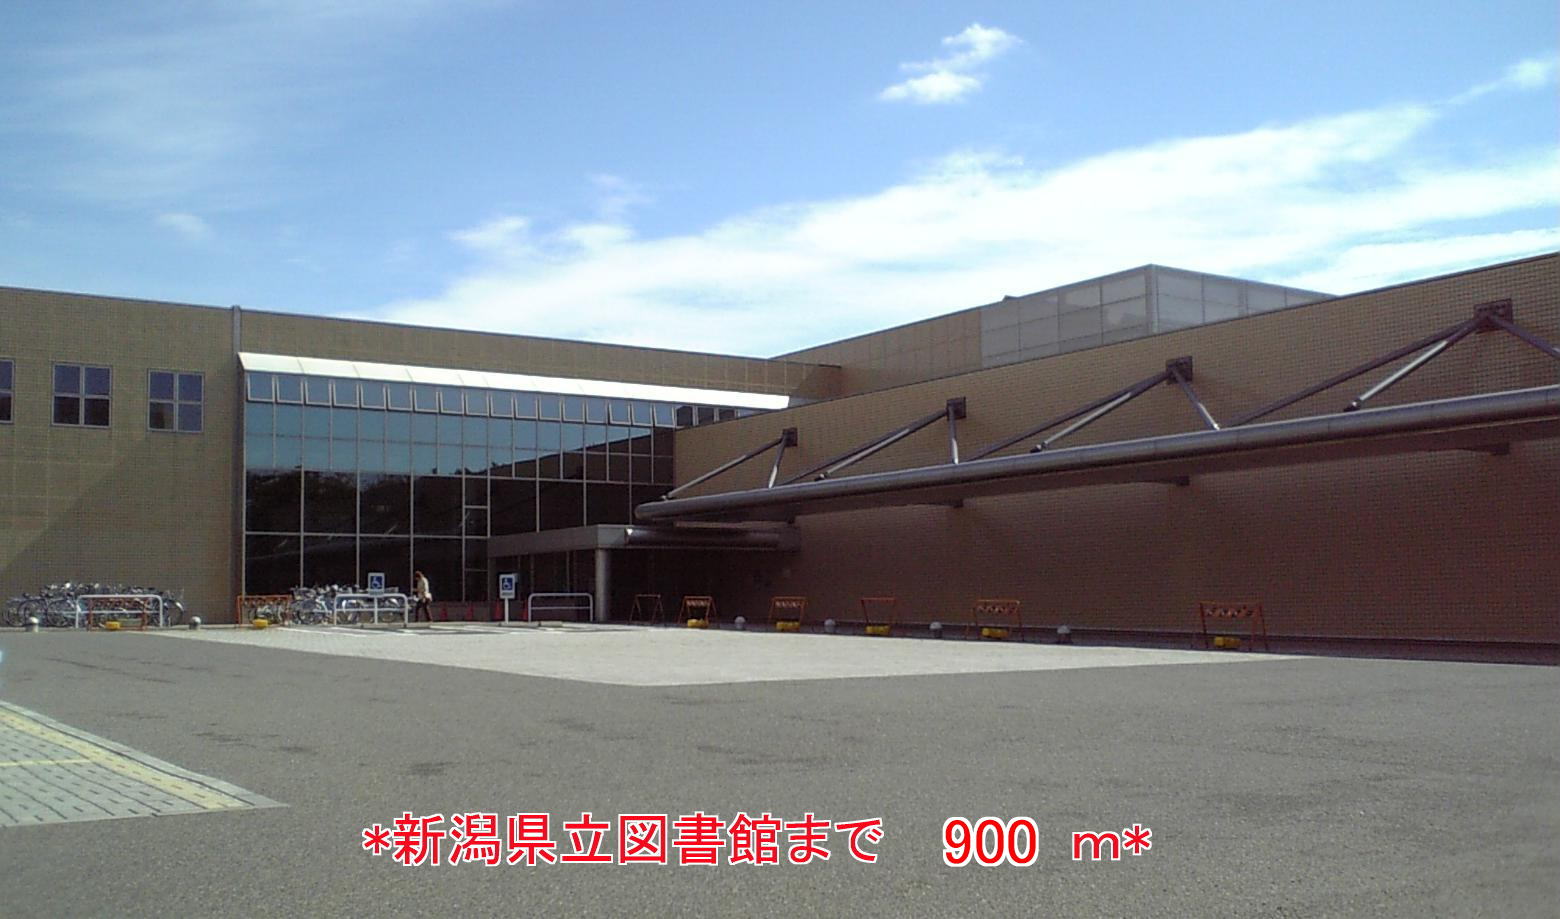 library. 900m until the prefectural library (library)